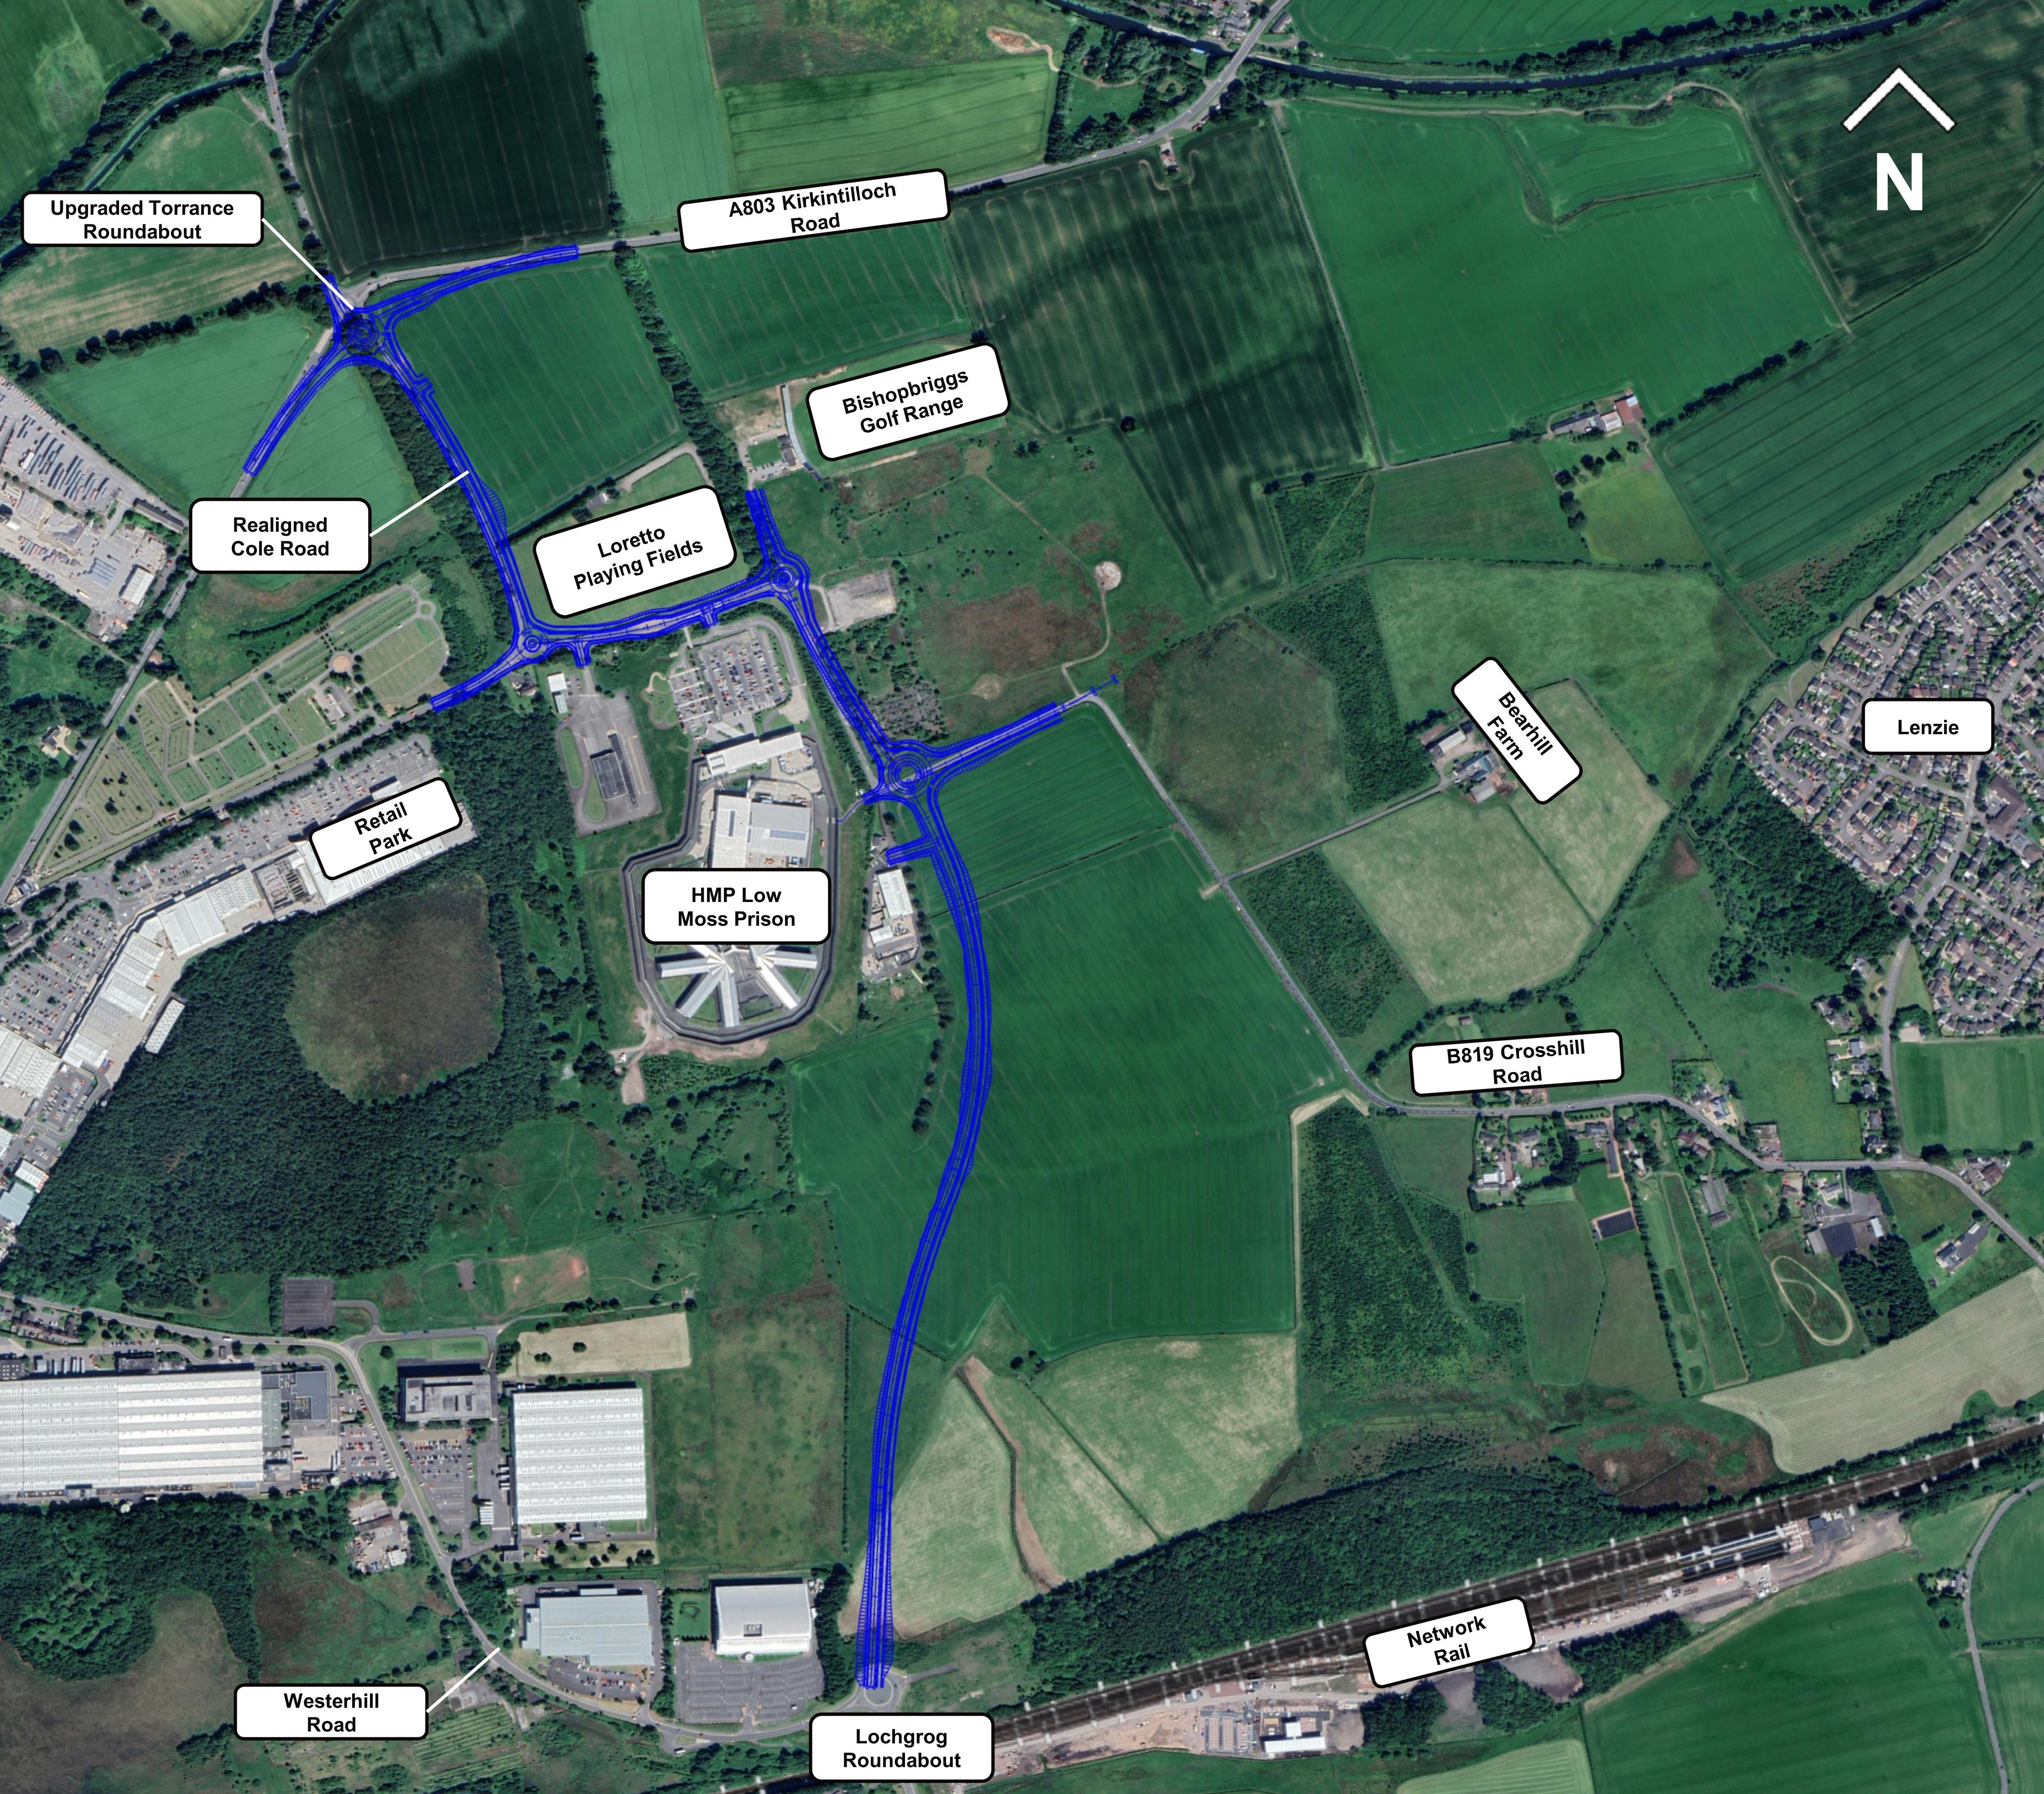 Plans for new road in Bishopbriggs to reduce congestion progress